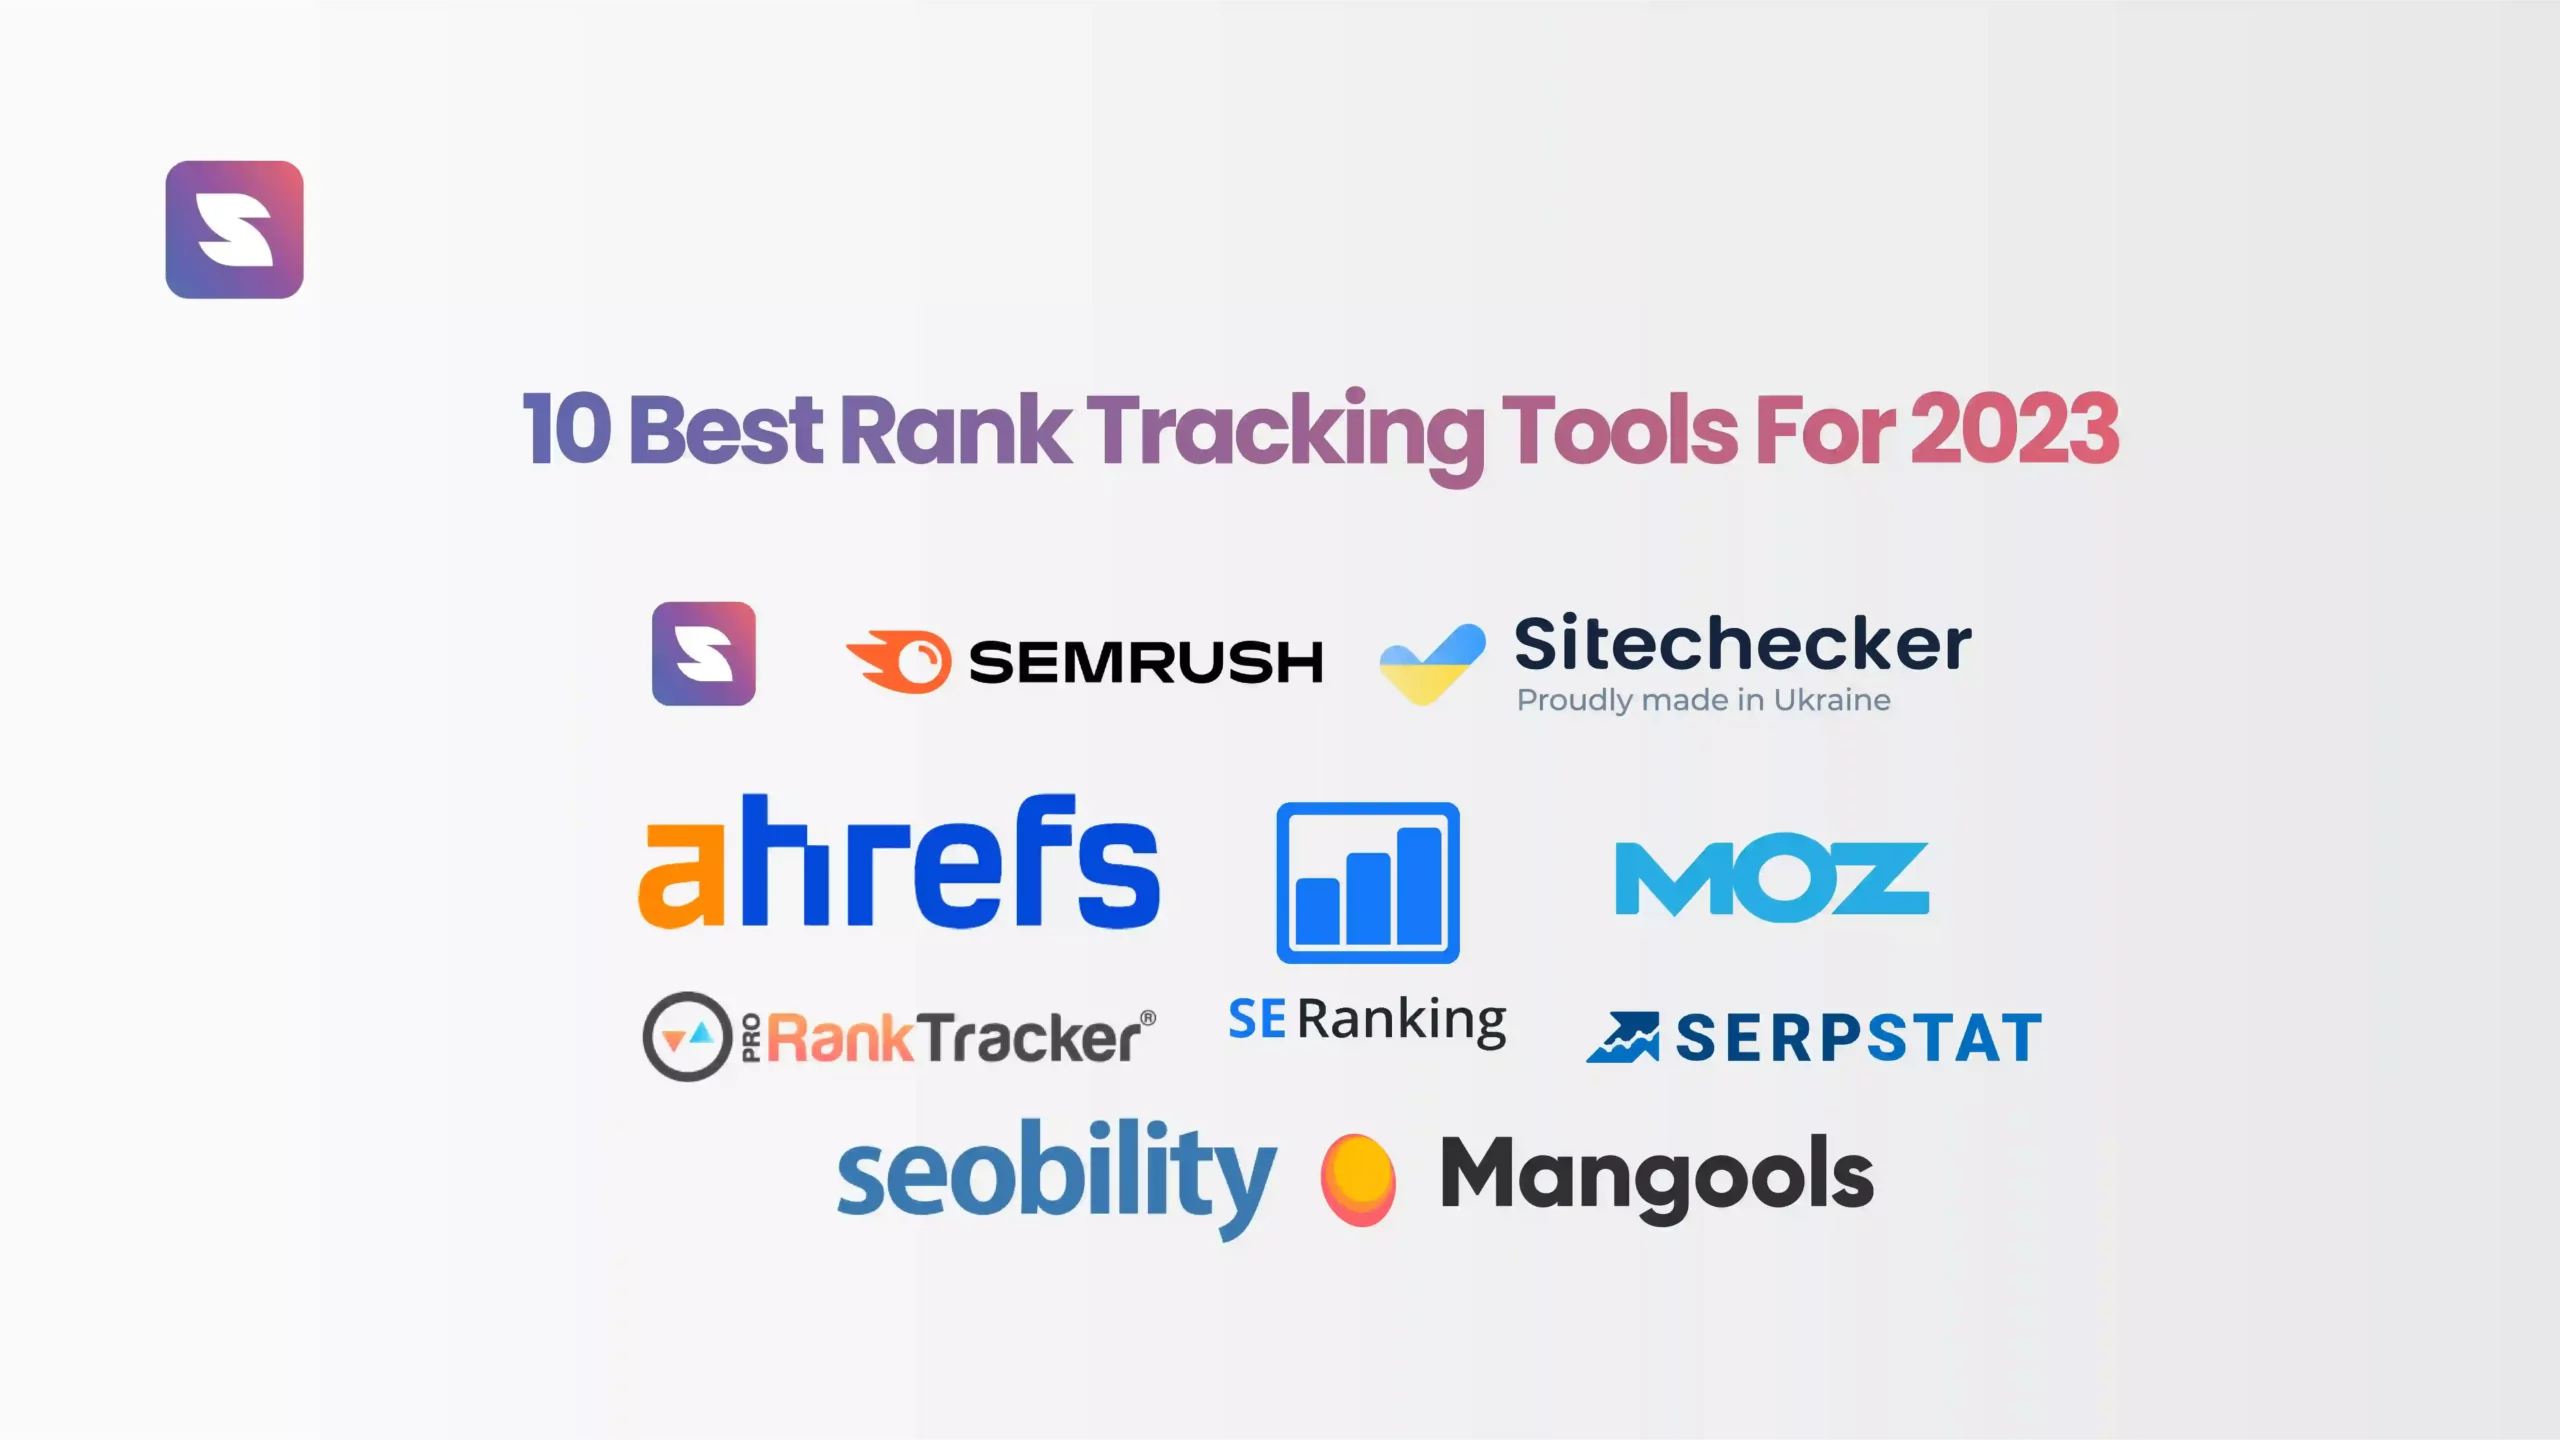 10 Best Rank Tracking Tools For 2023